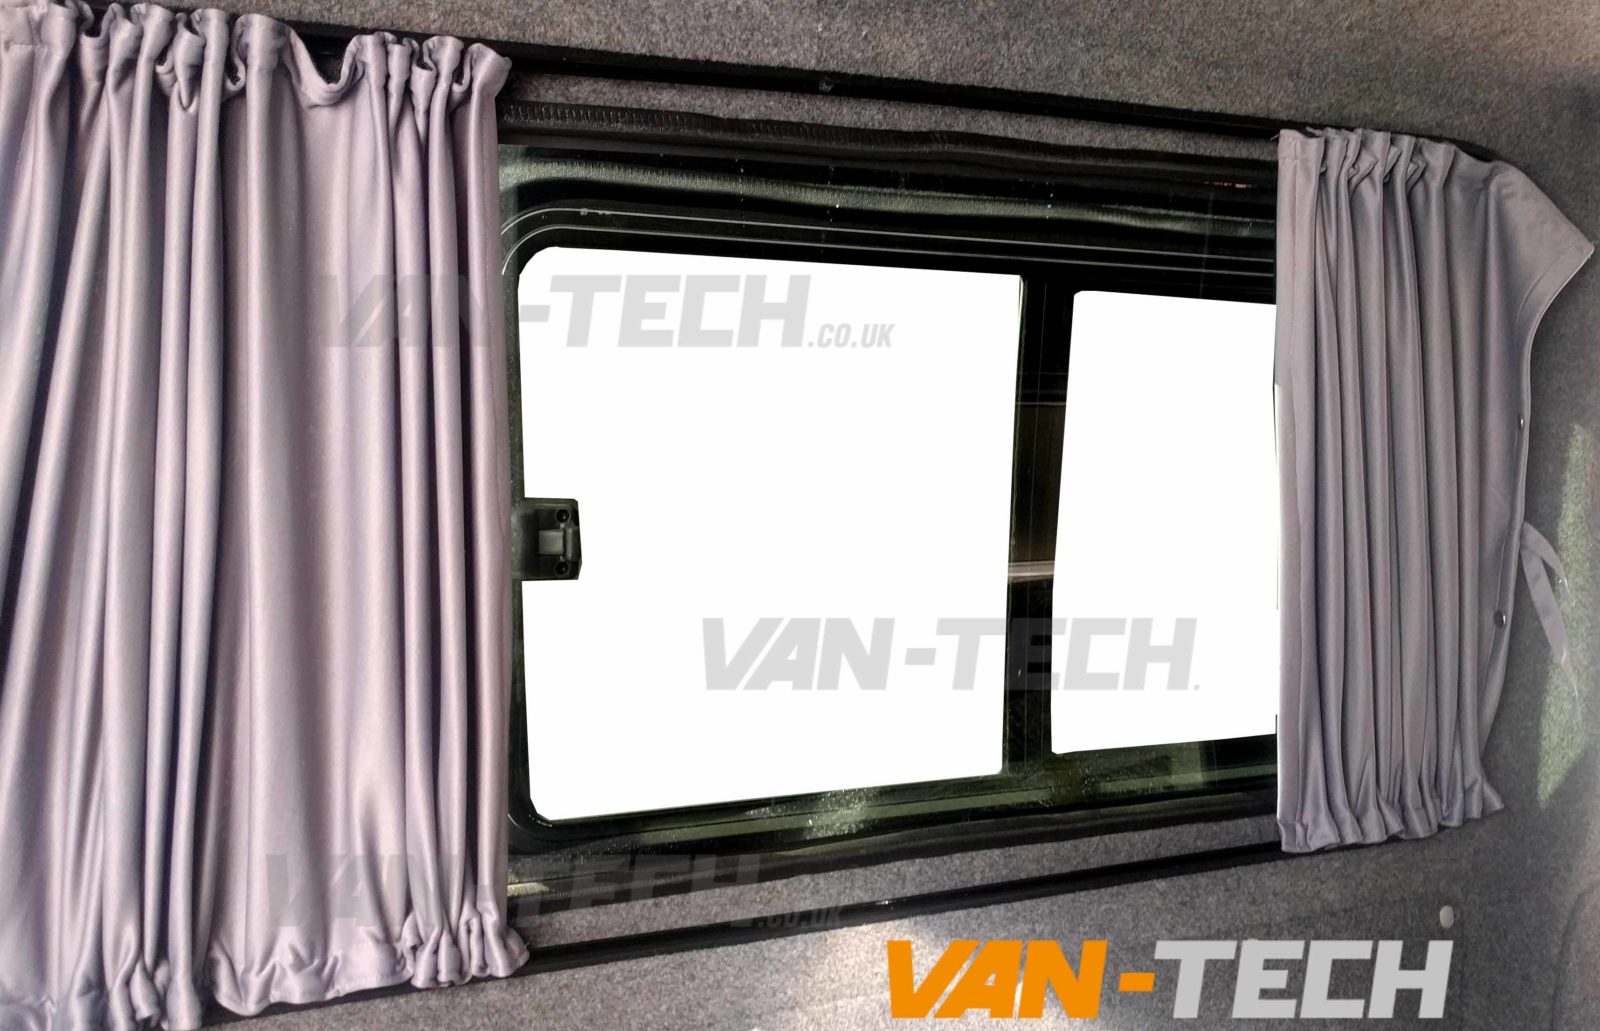 vw t6 curtains